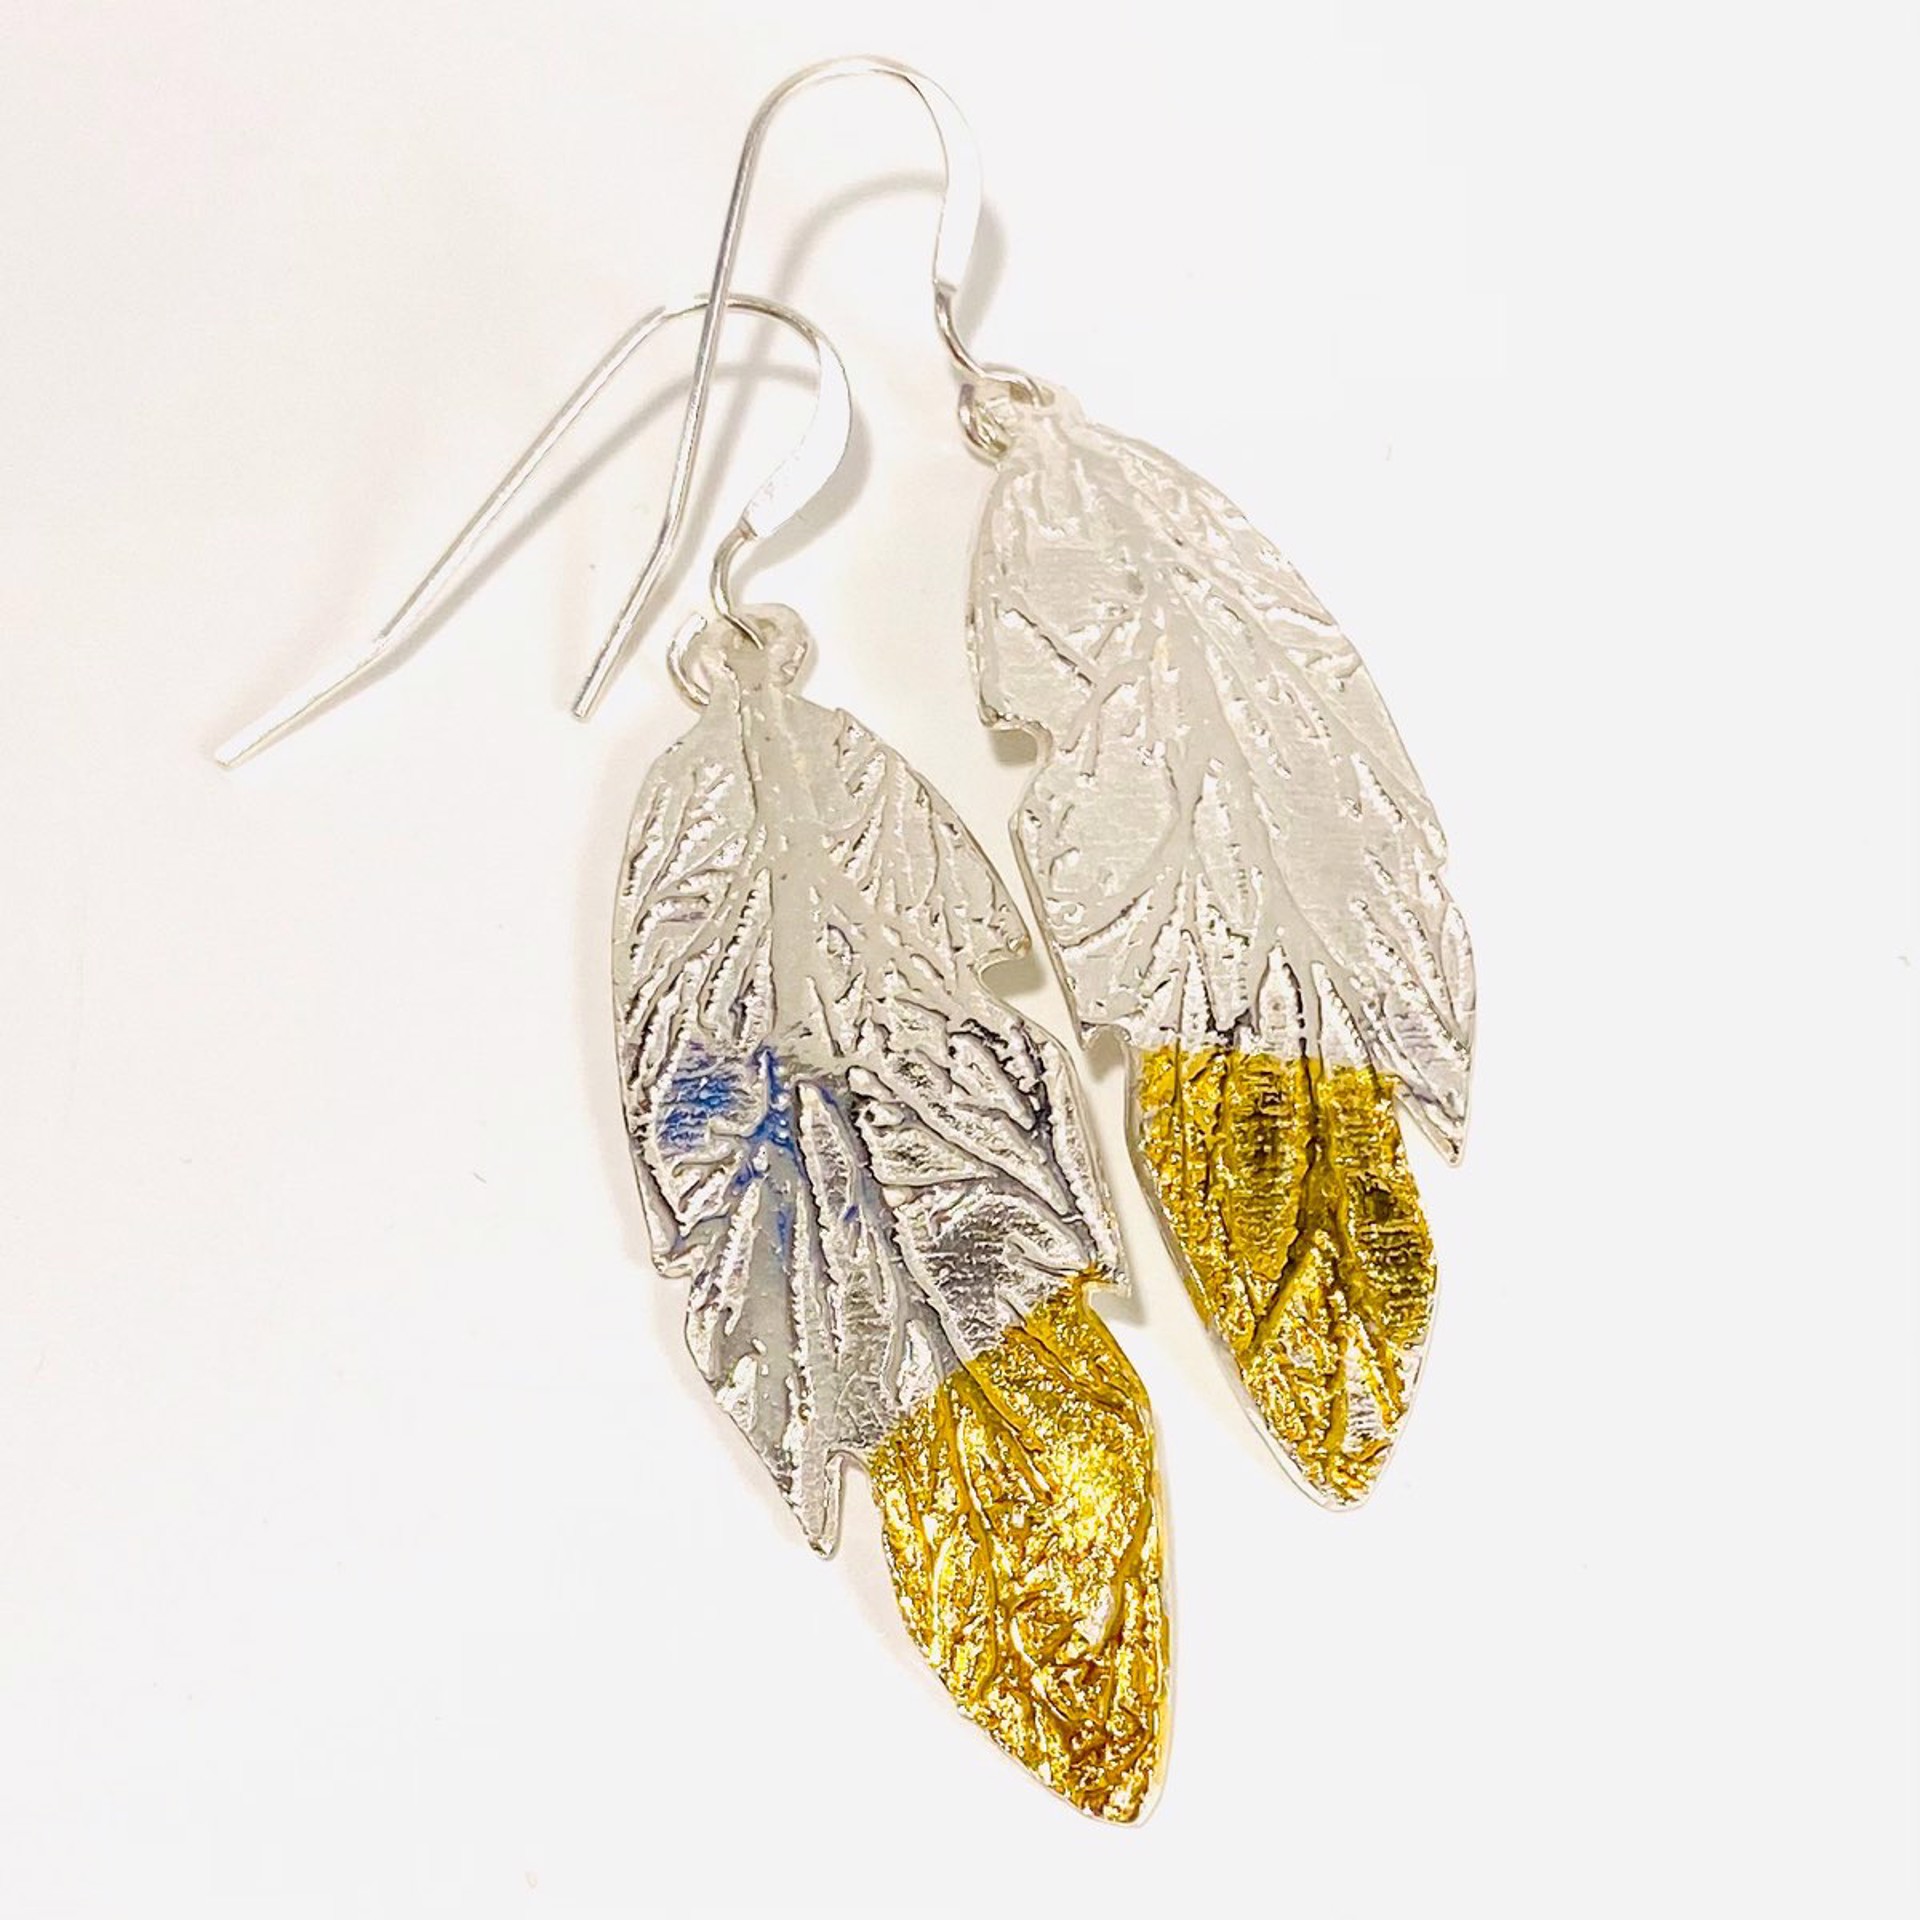 KH22-24 Keum-boo Fine Silver and Gold Large Feather Earrings by Karen Hakim